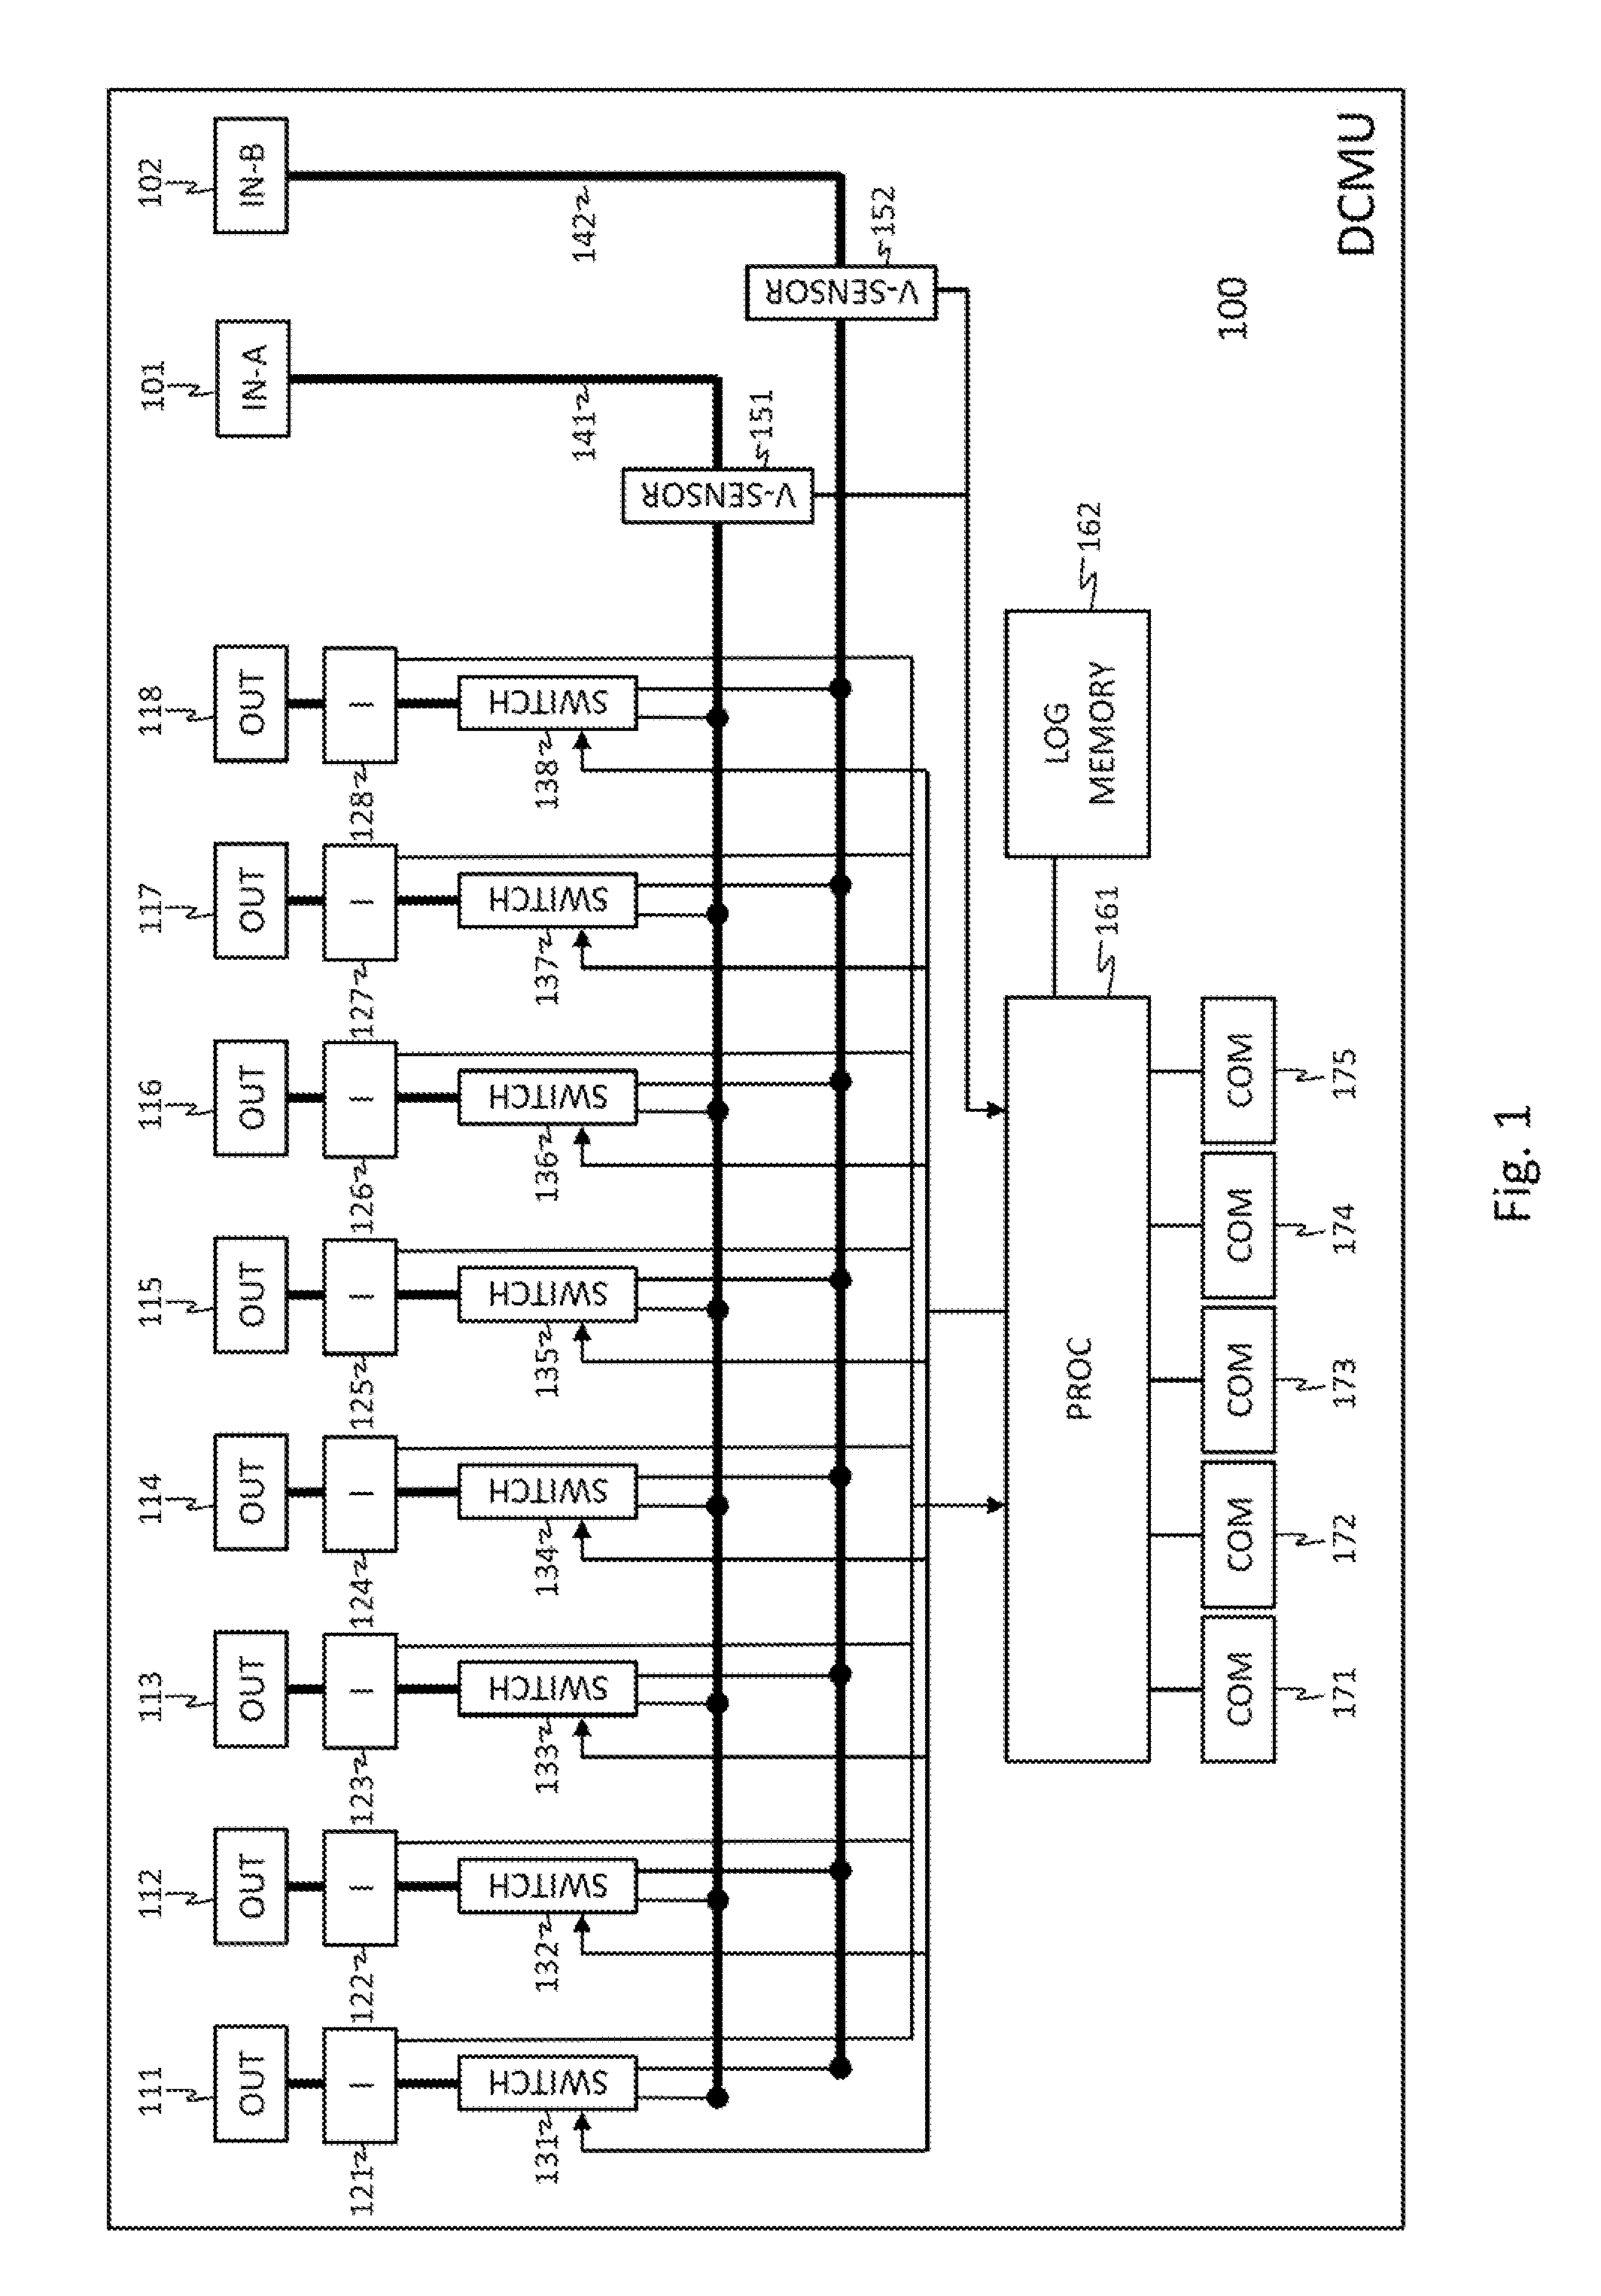 Data center management unit with dynamic load balancing